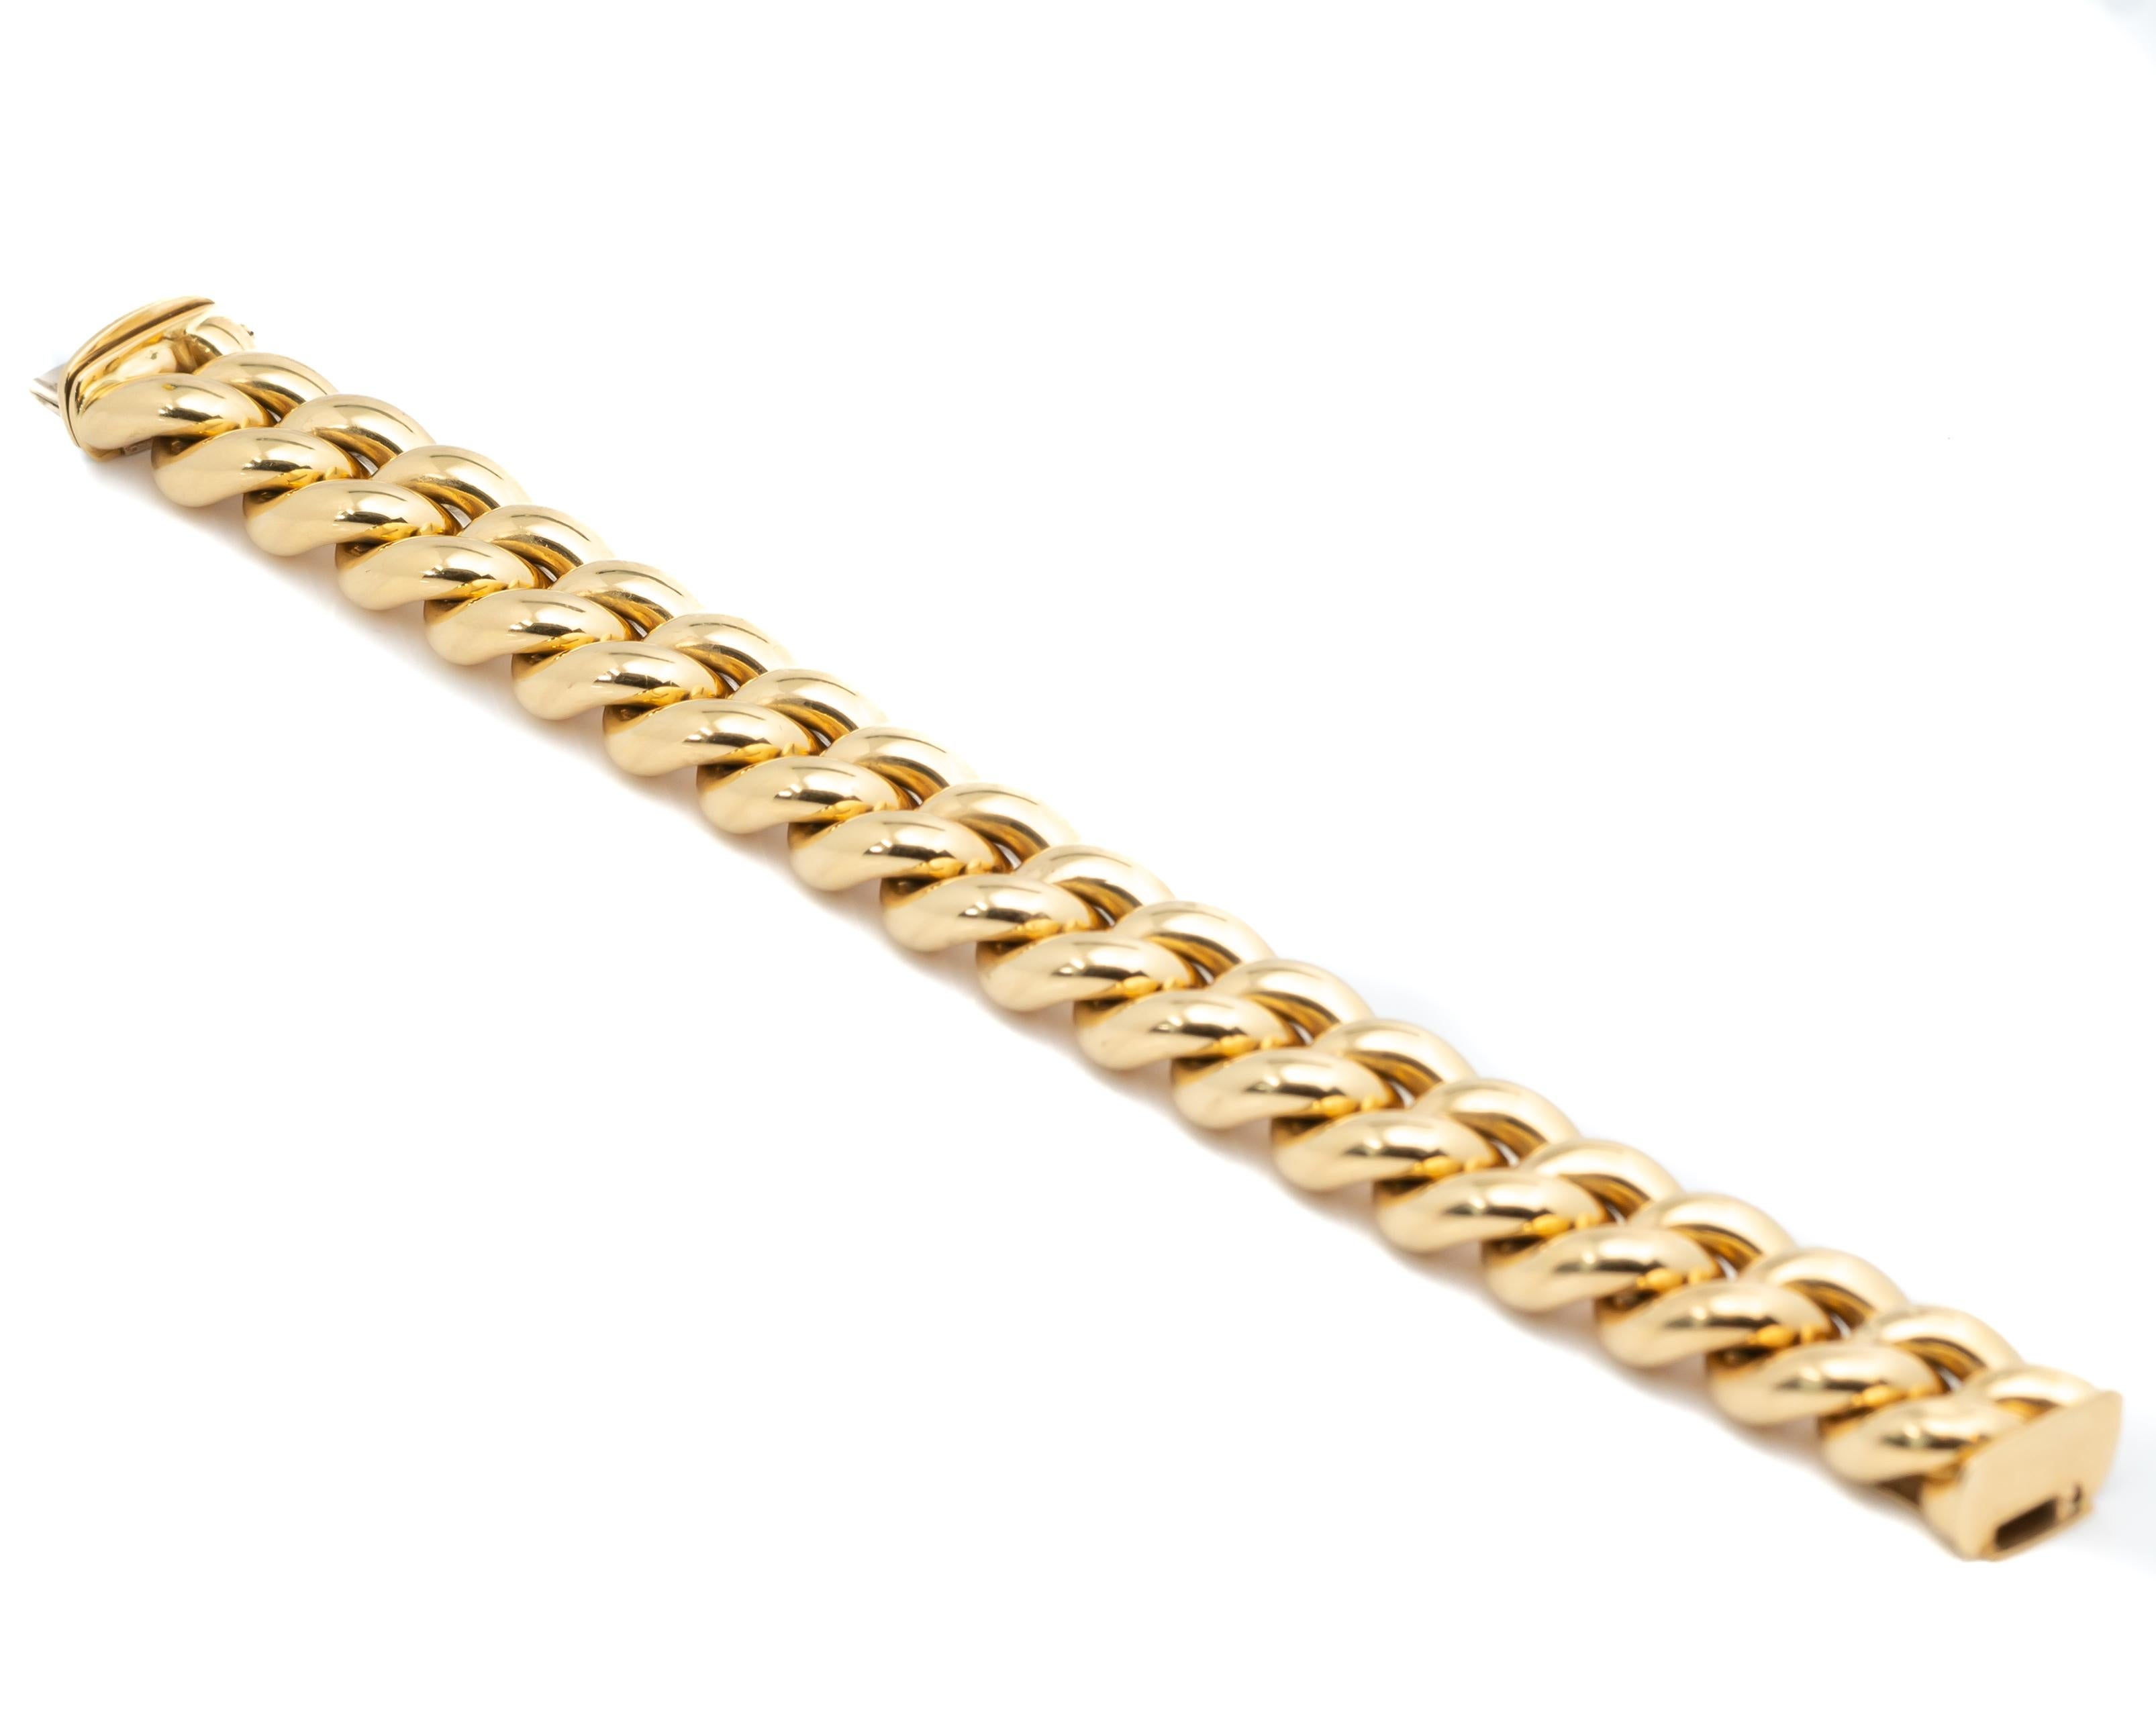 Beautifully crafted 18 Karat yellow gold high polish bracelet
Made by iconic Tiffany & Co (hallmarked)
1980s Vintage 
Resembles a cuban link bracelet 

Bracelet details:
Weight: 67.4 grams
Gold: 18 Karat yellow gold (hallmarked)
Measurements: 16